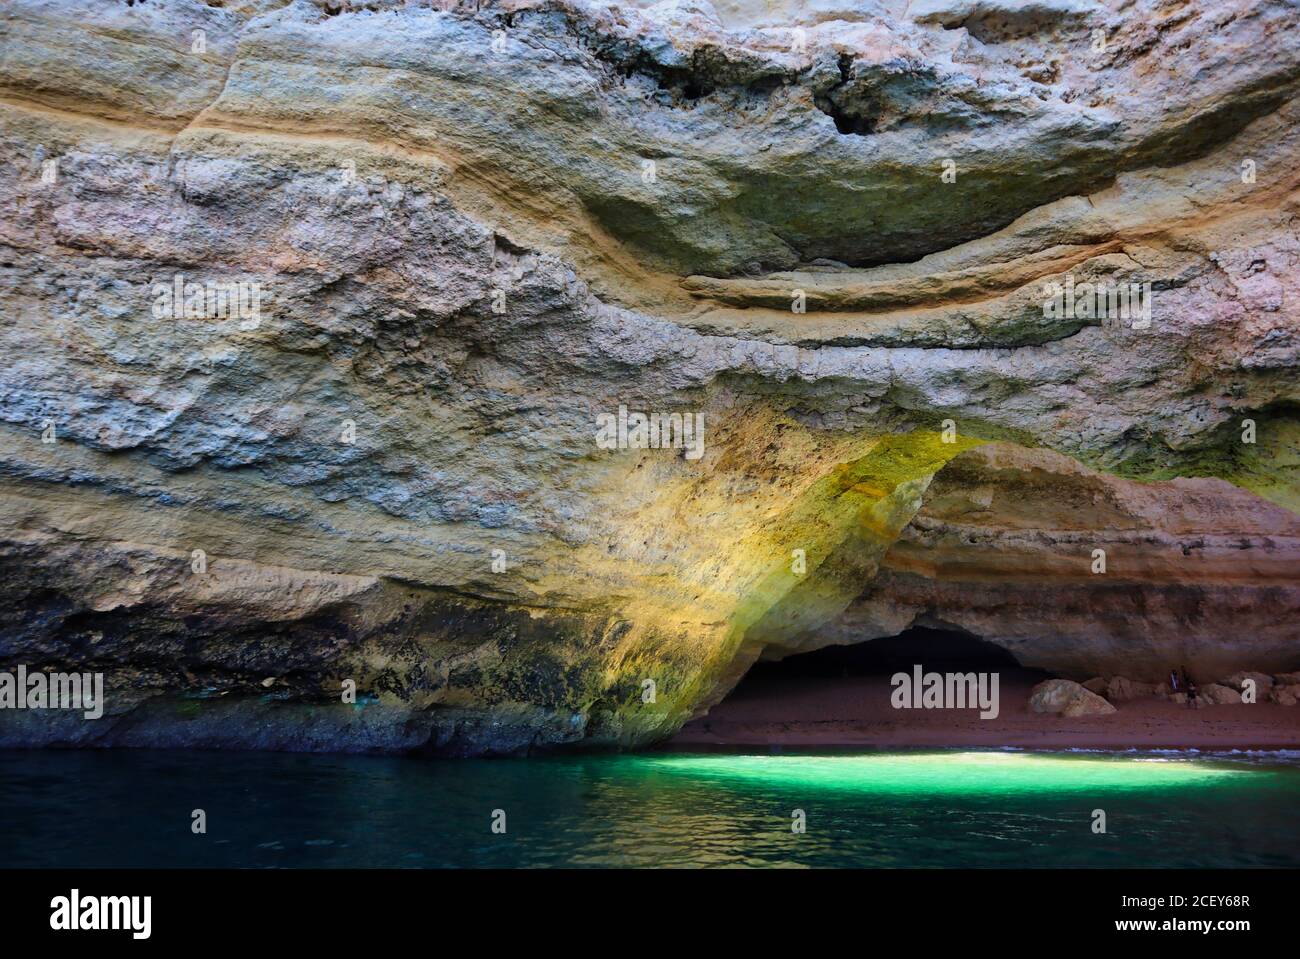 Benagil cave picture taken from a boat with a view of light coming out from the hole up in the cave. Stock Photo